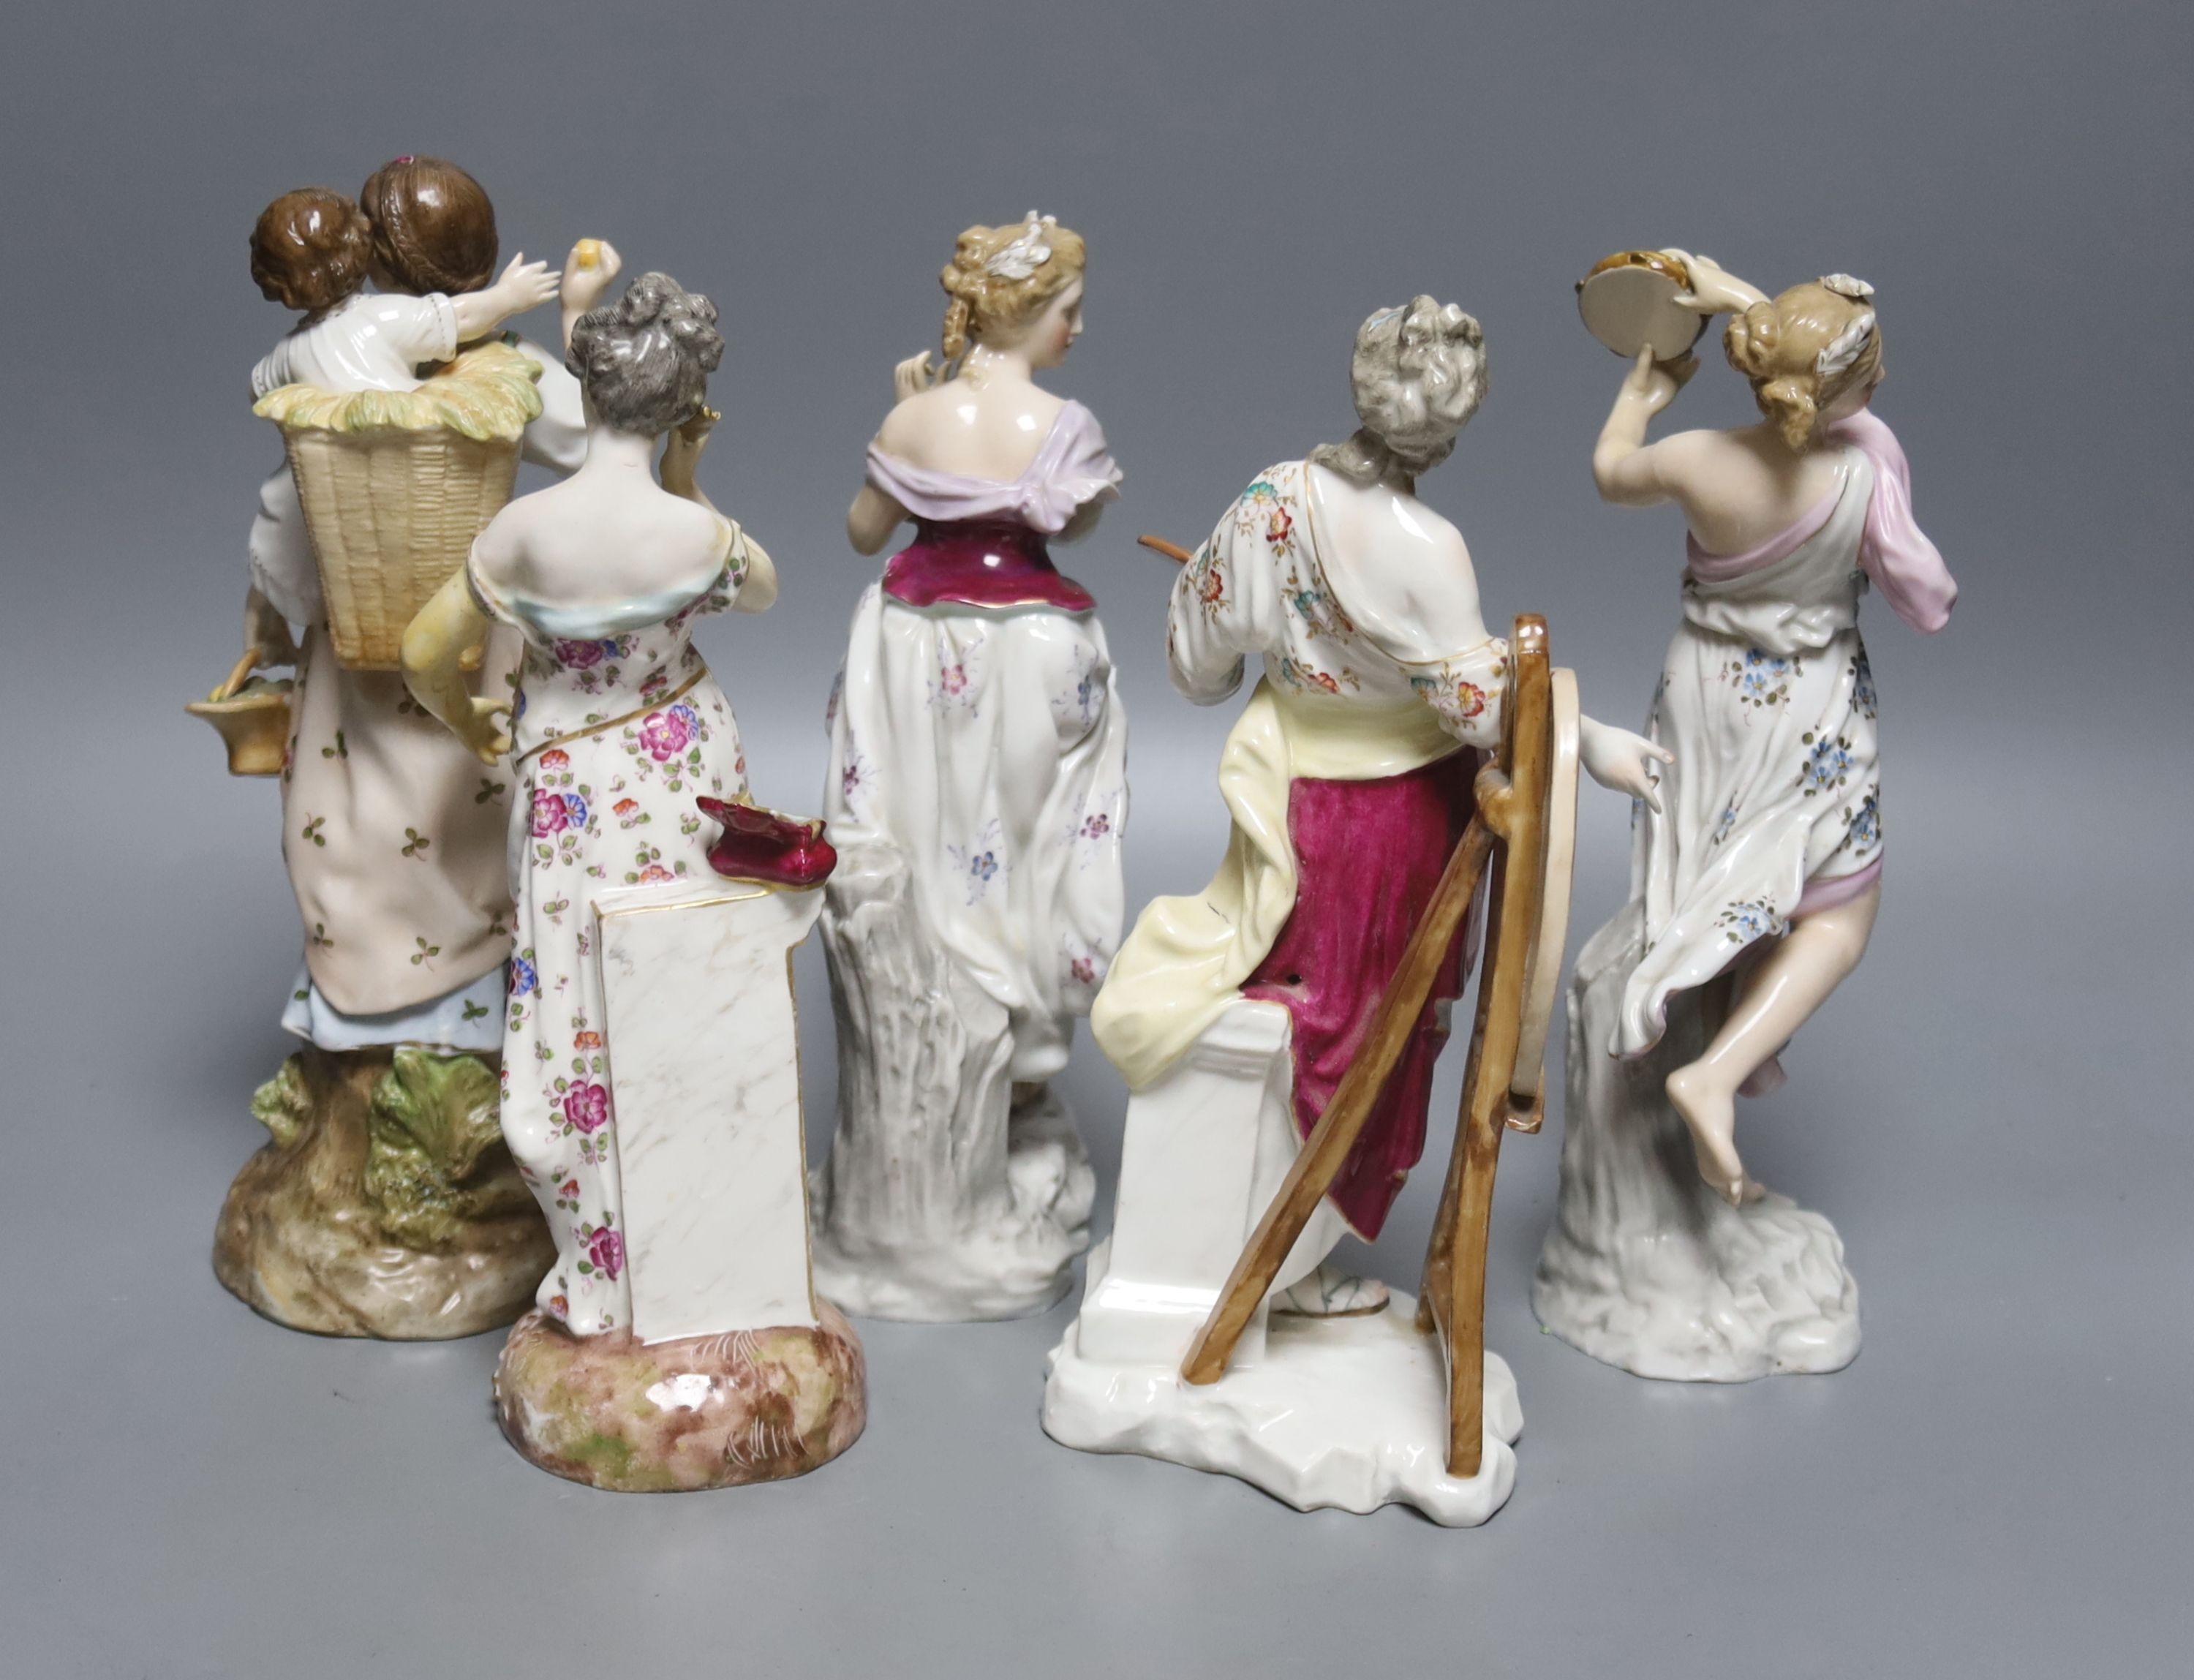 A pair of German musical figurines and three other similar figurines, tallest 23cm